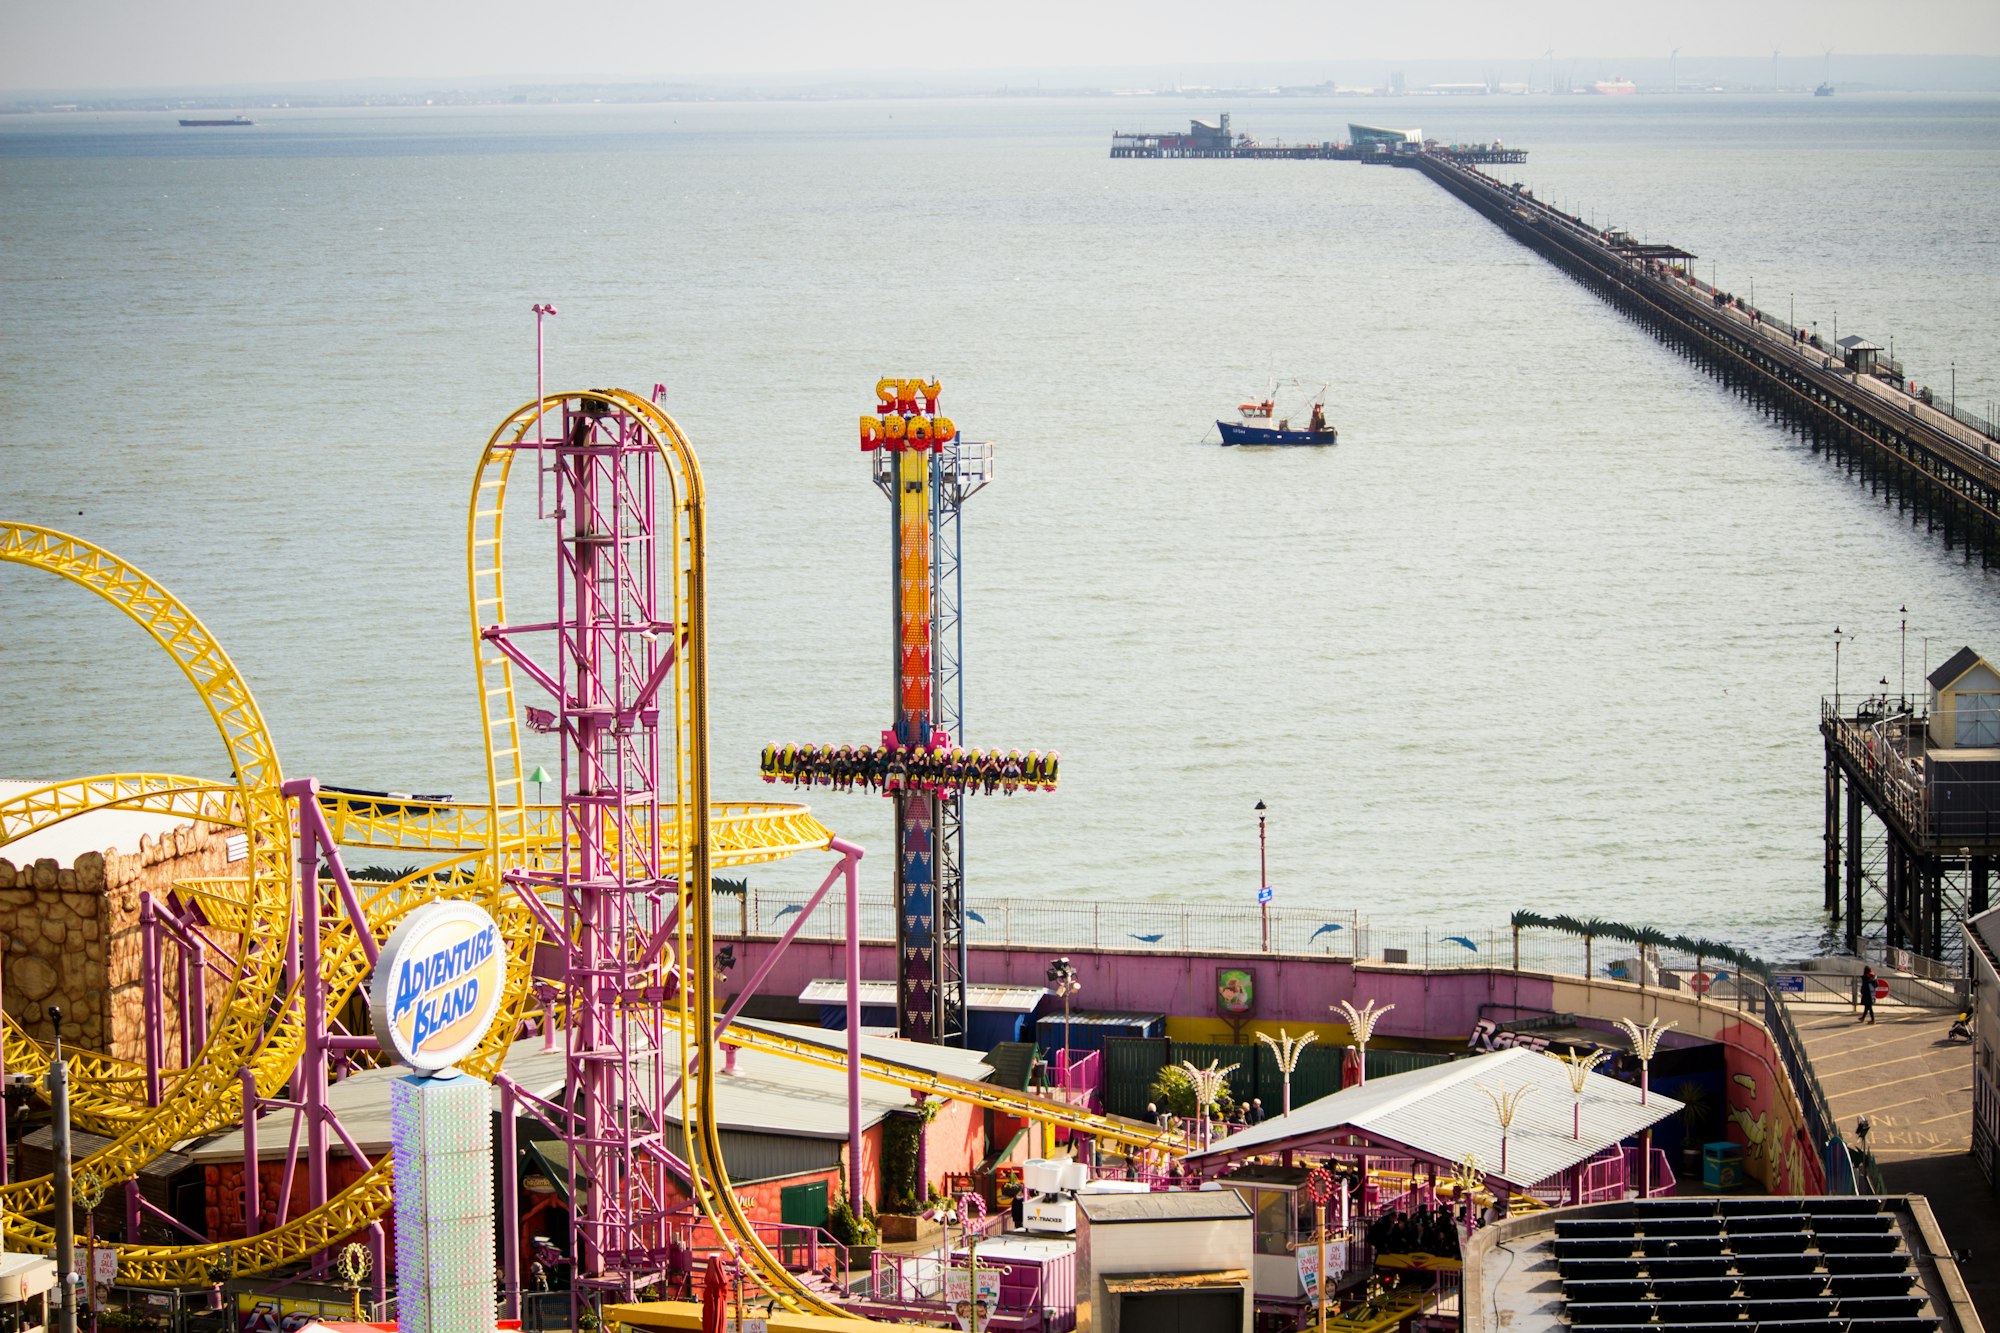 Southend Pier - noted as the longest pleasure pier in the world, and the Adventure Island Fun Park at Southend-on-Sea, Essex, Britain.  